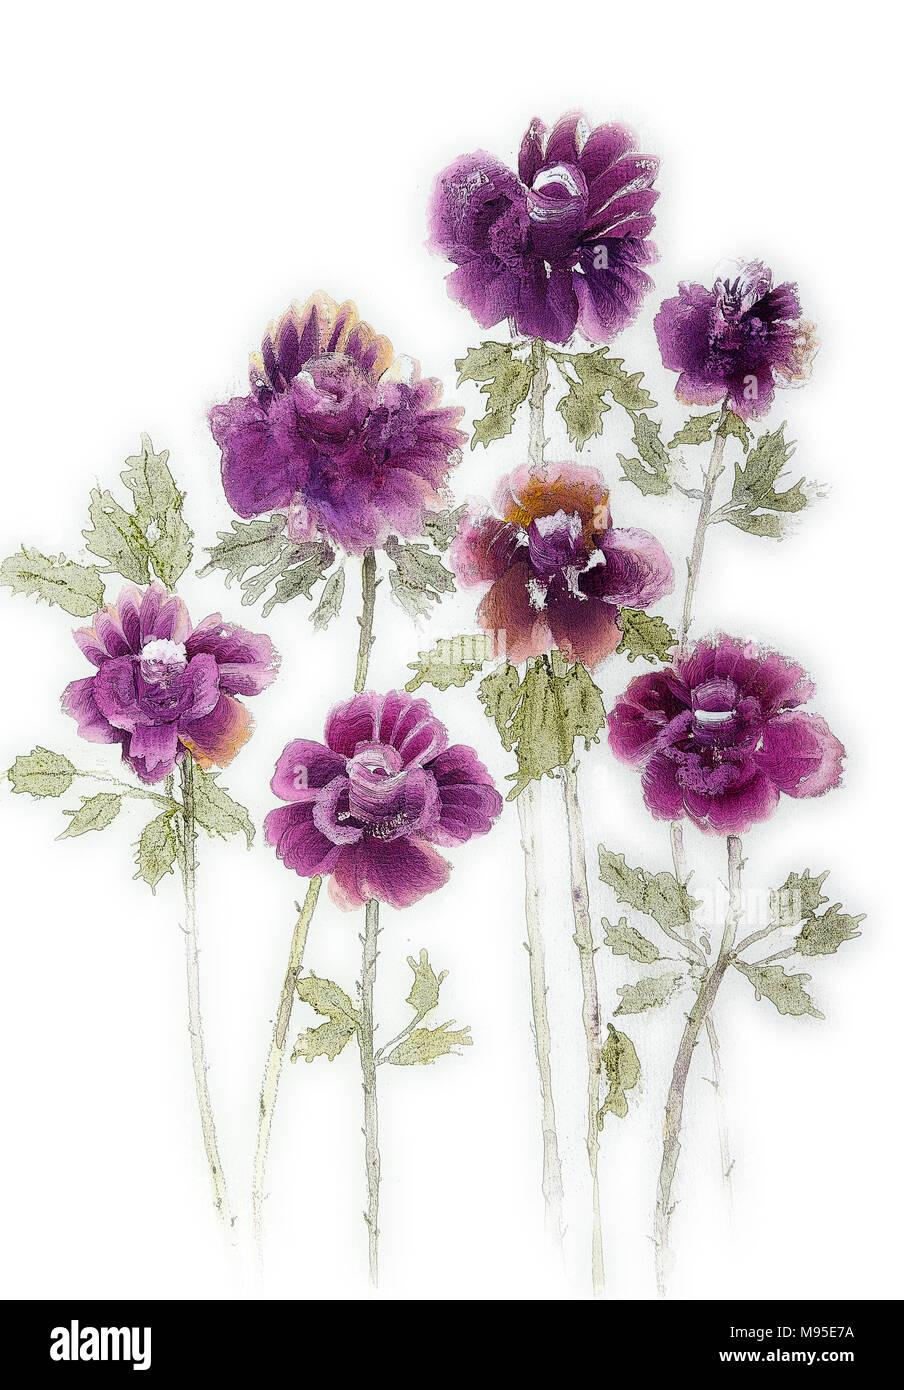 Seven purple roses on a white background. The dabbing technique near the edges gives a soft focus effect due to the altered surface roughness of the p Stock Photo